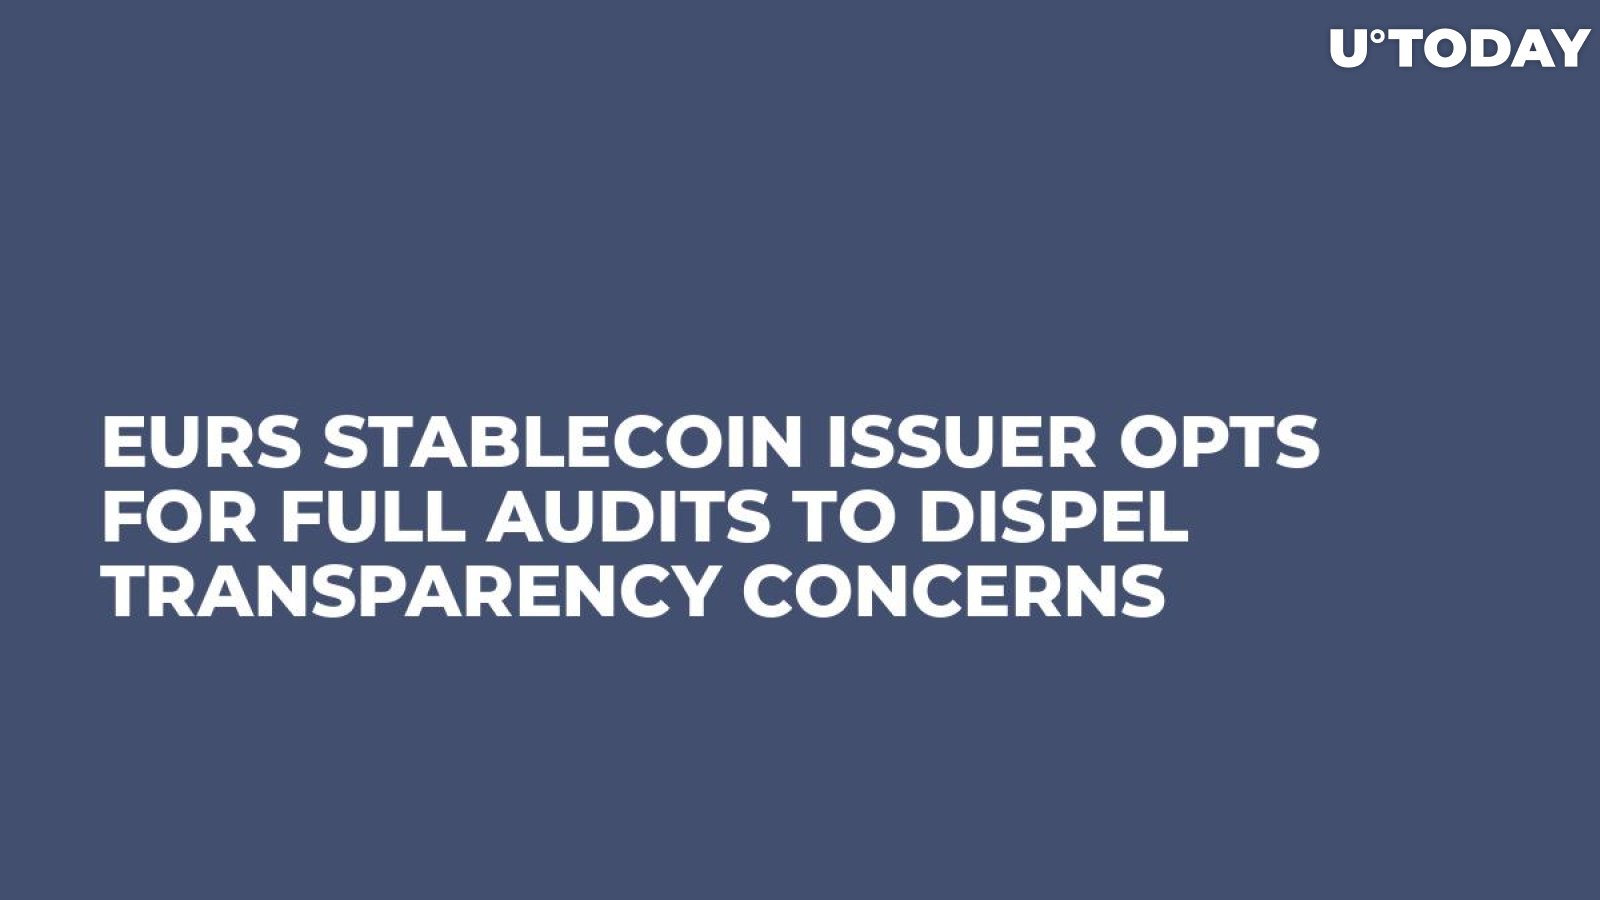 EURS Stablecoin Issuer Opts for Full Audits to Dispel Transparency Concerns